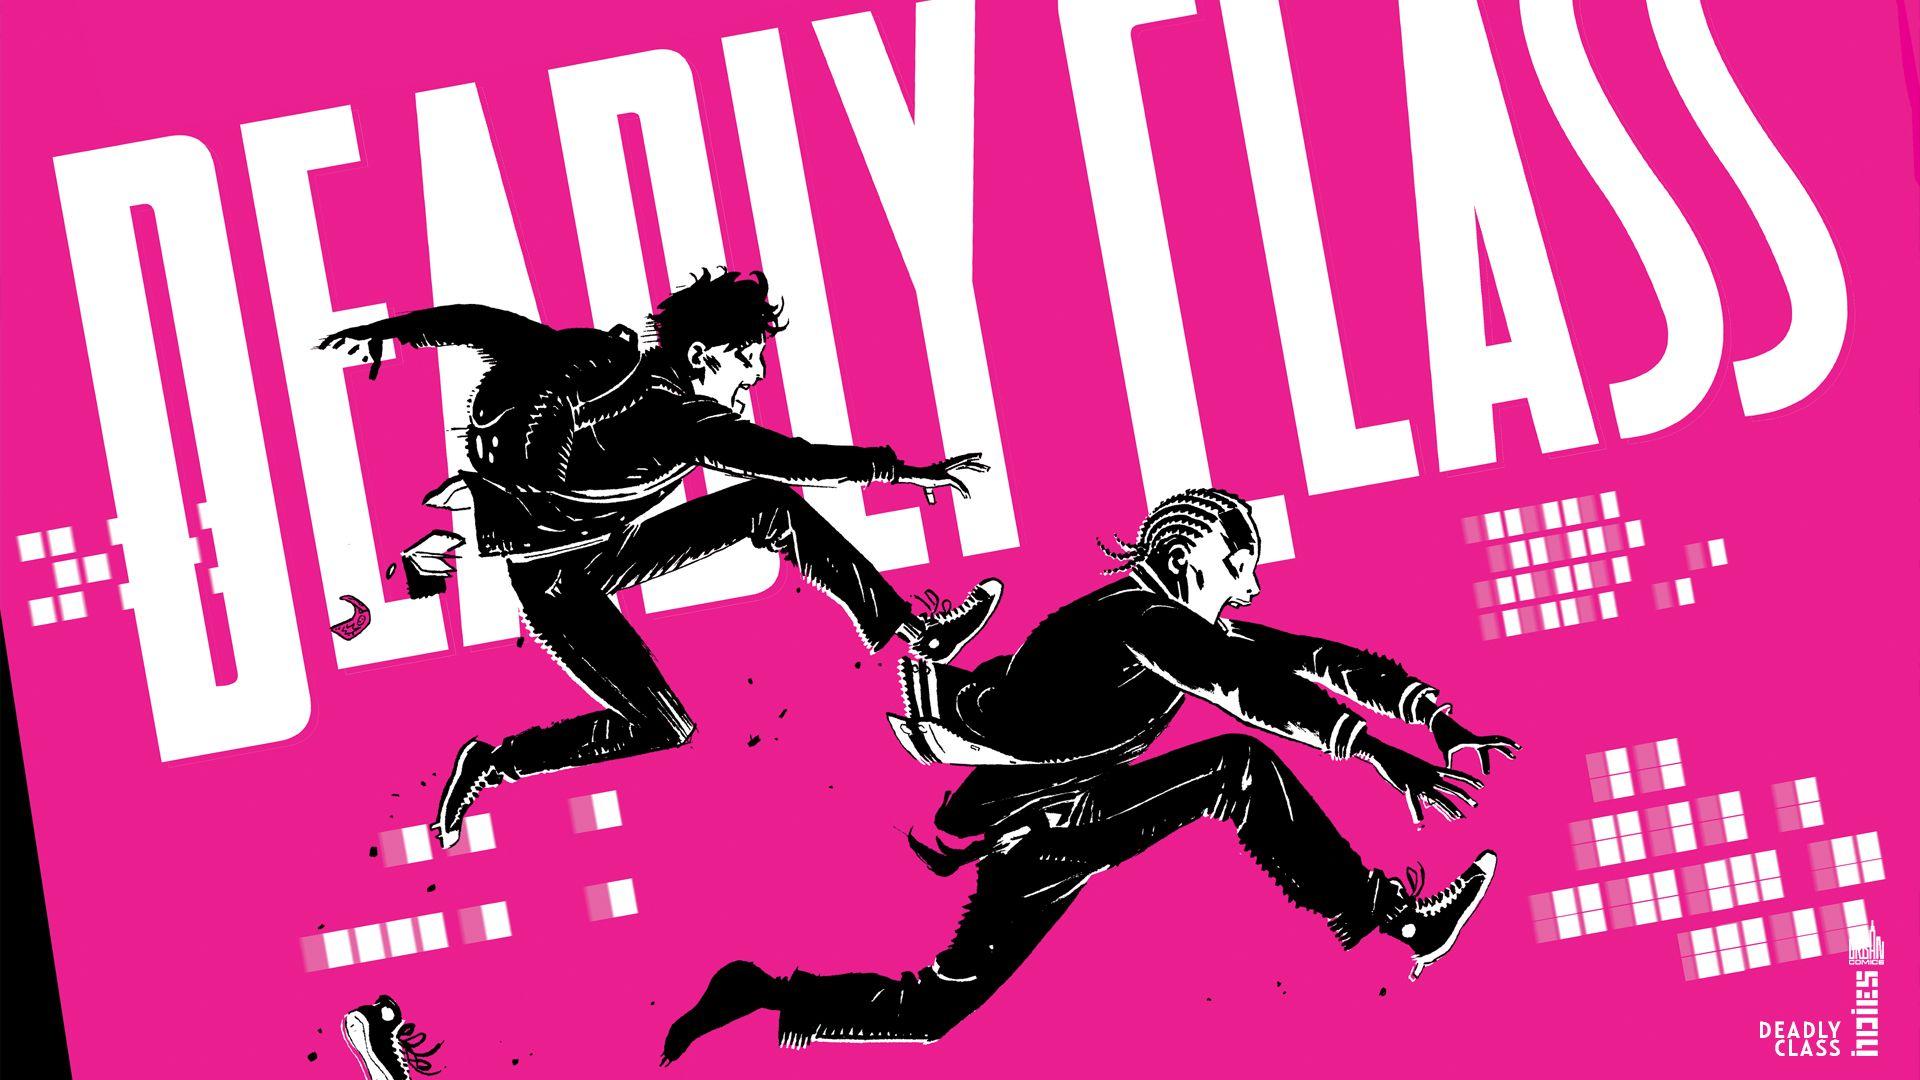 Deadly Class Wallpapers